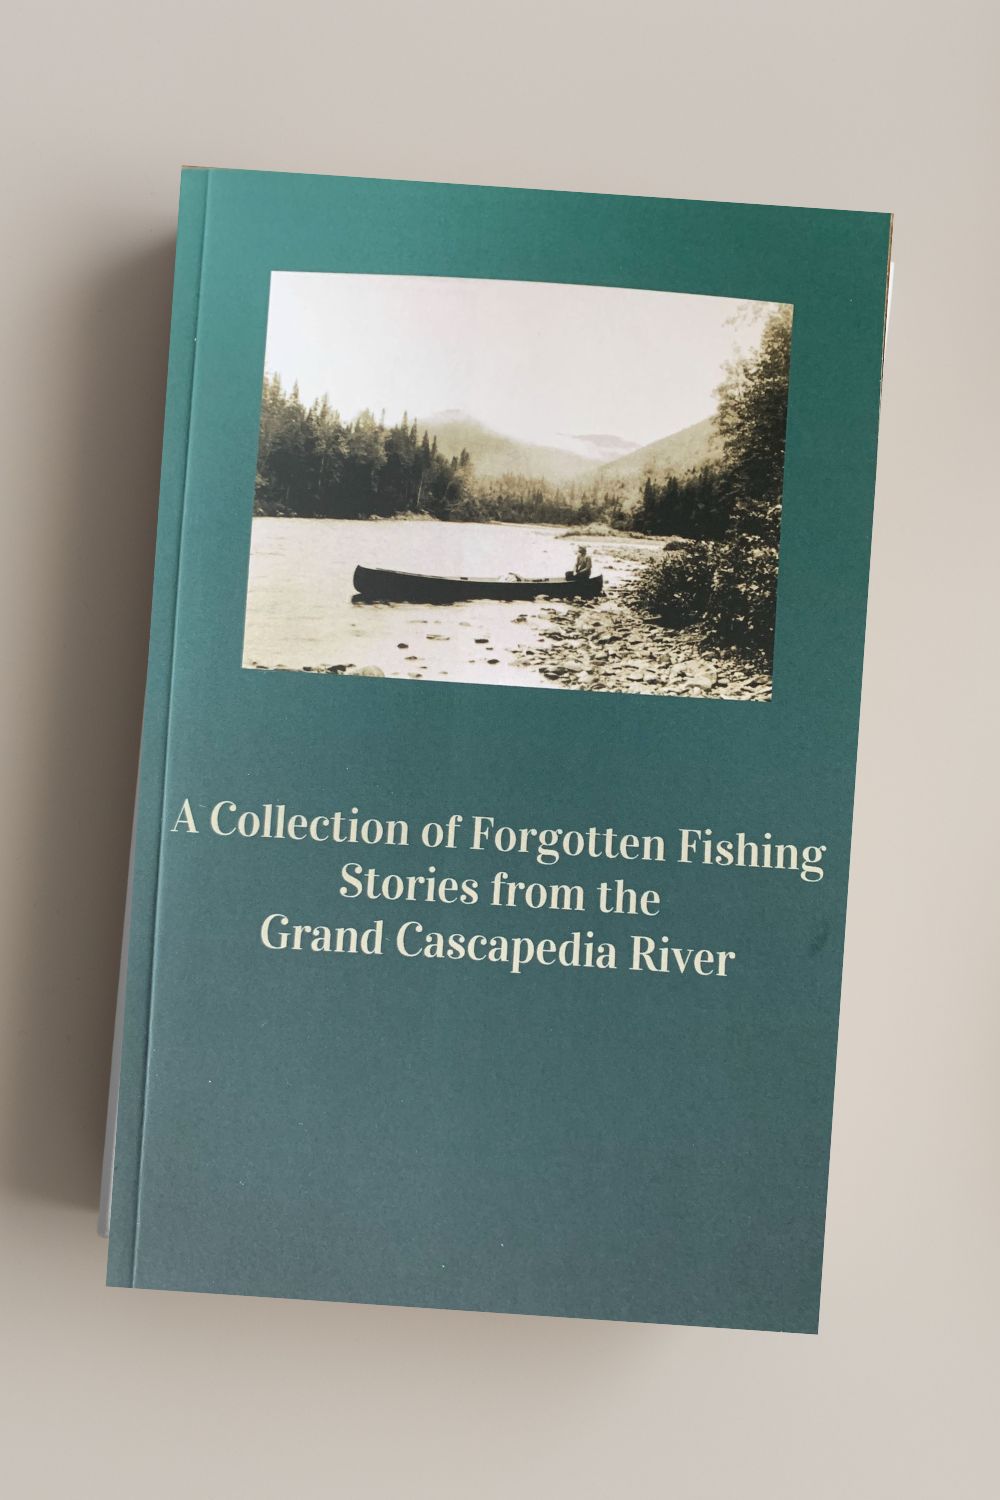 A Collection of Forgotten Fishing Stories from the Grand